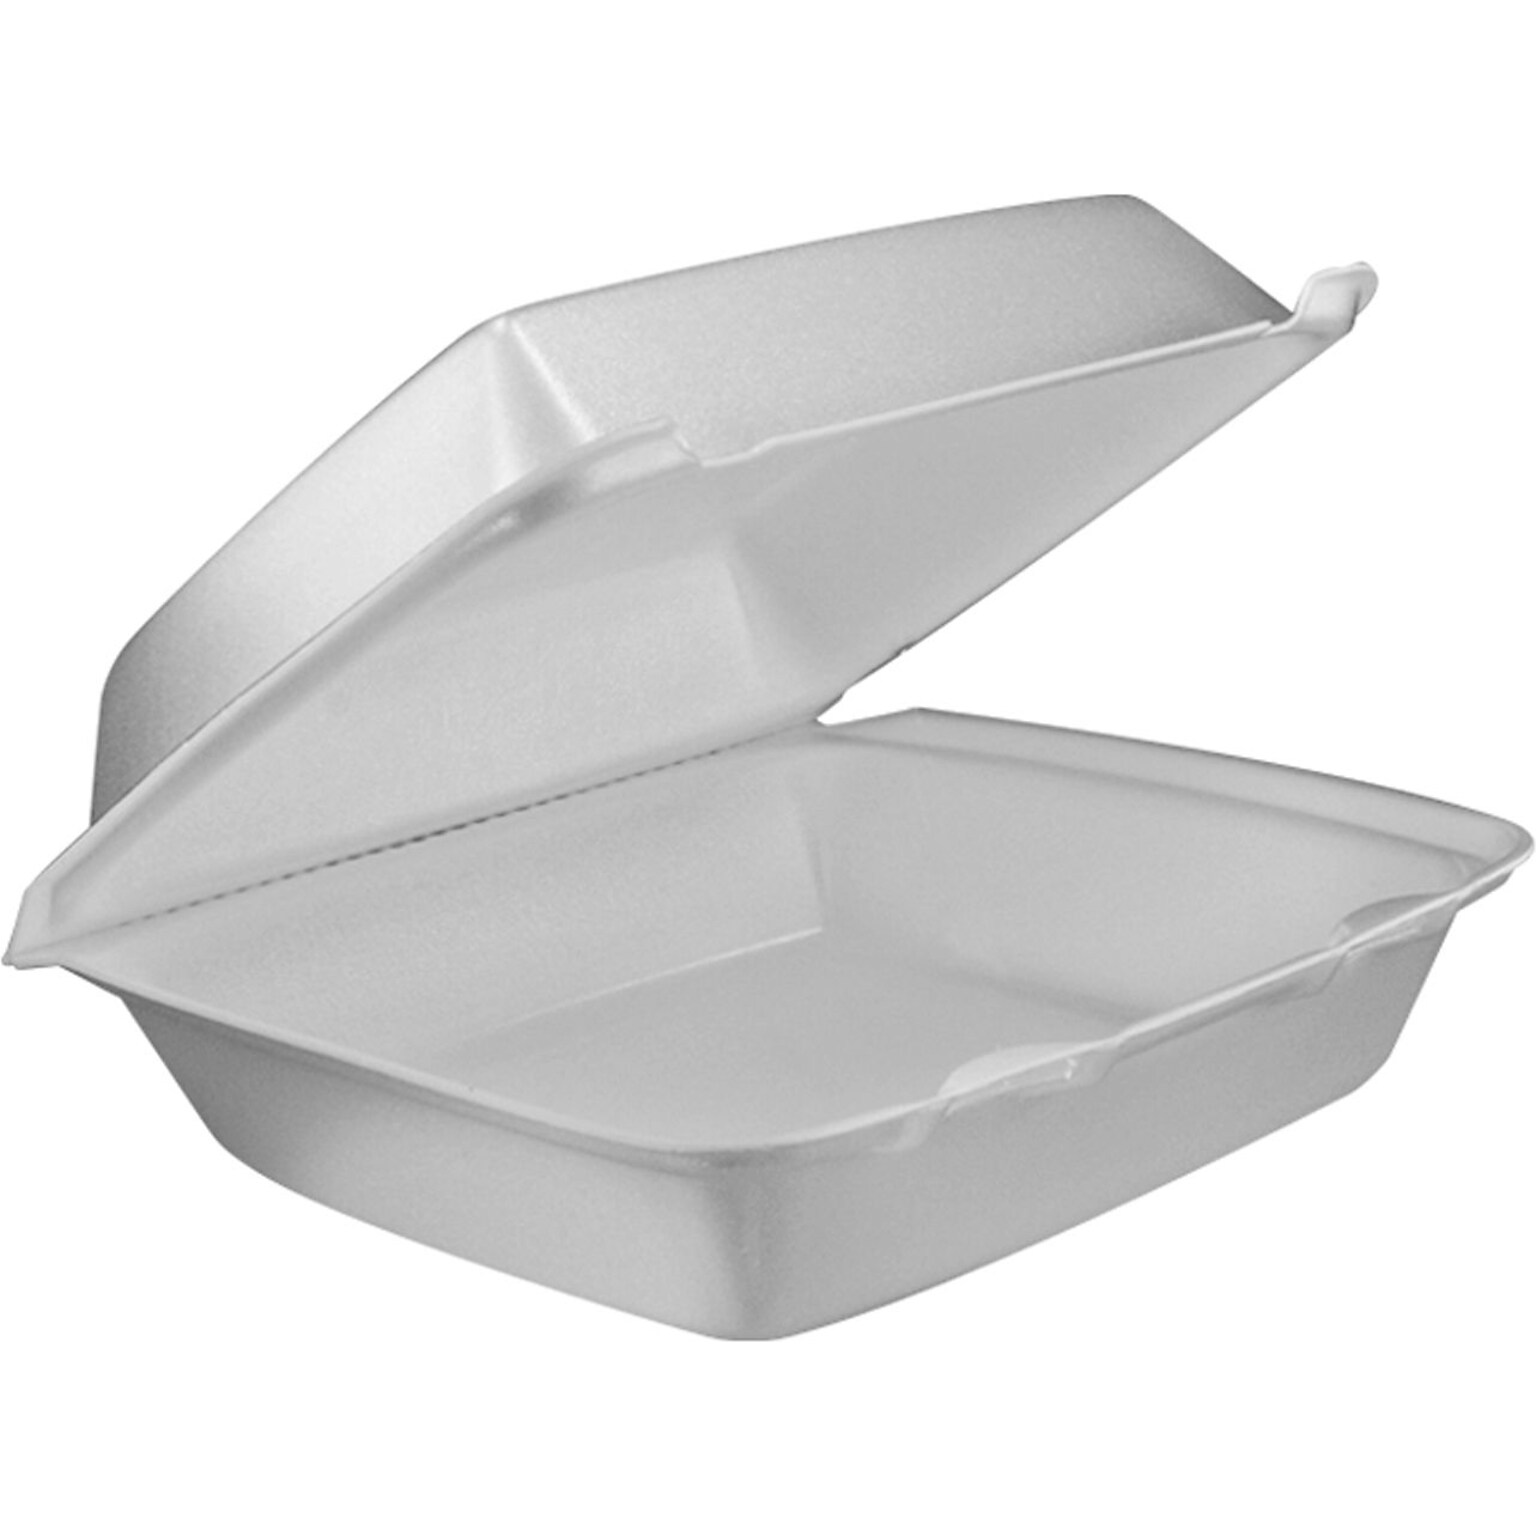 Dart® Foam Hinged Lid Carryout Container, 8-3/8x7-7/8x3-1/4, 200/Case